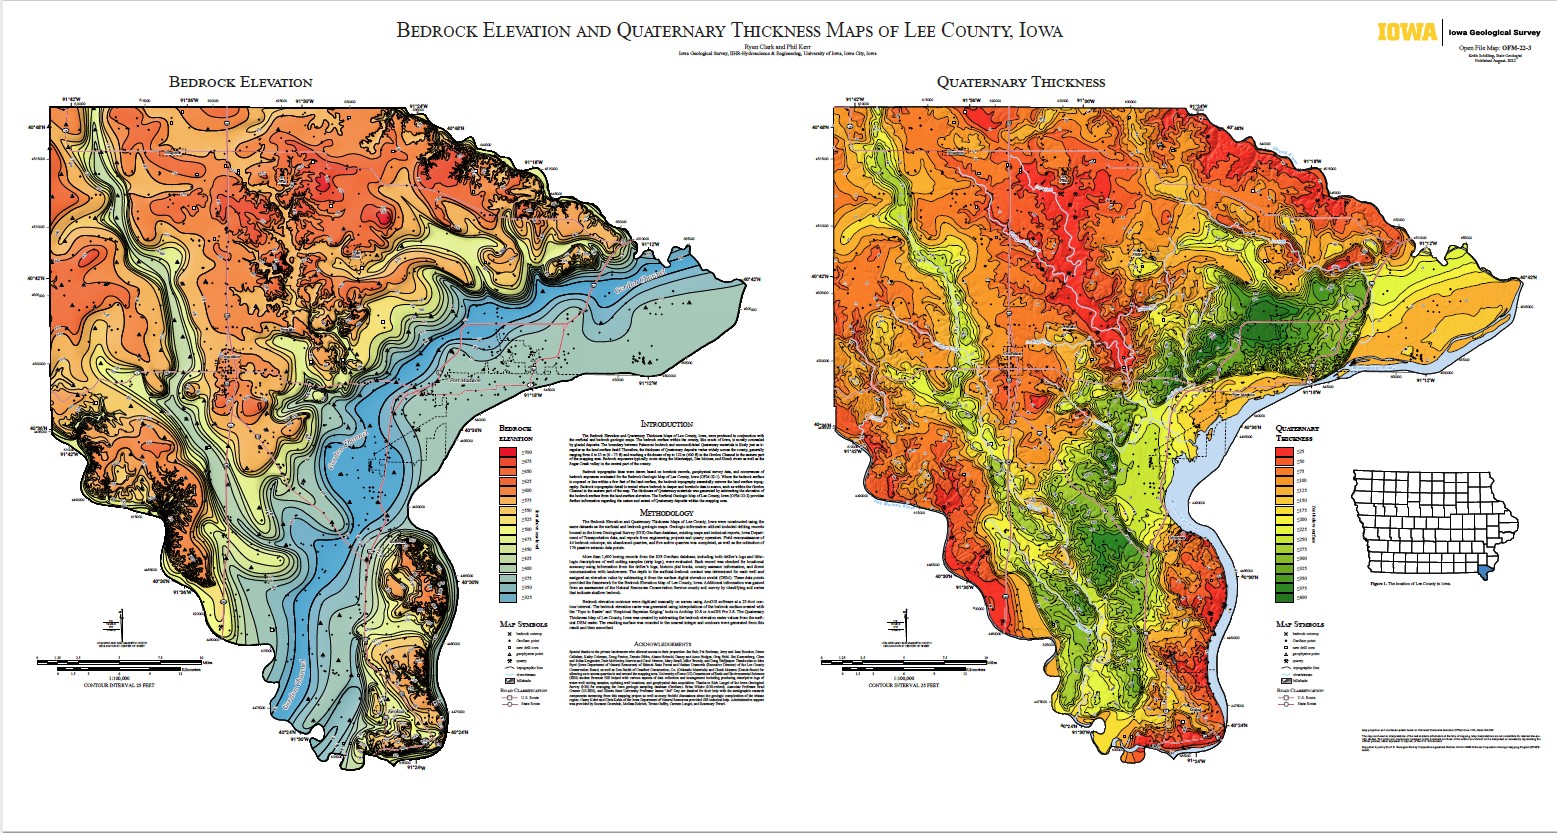 Bedrock elevation and quaternary thickness maps of Lee County, Iowa